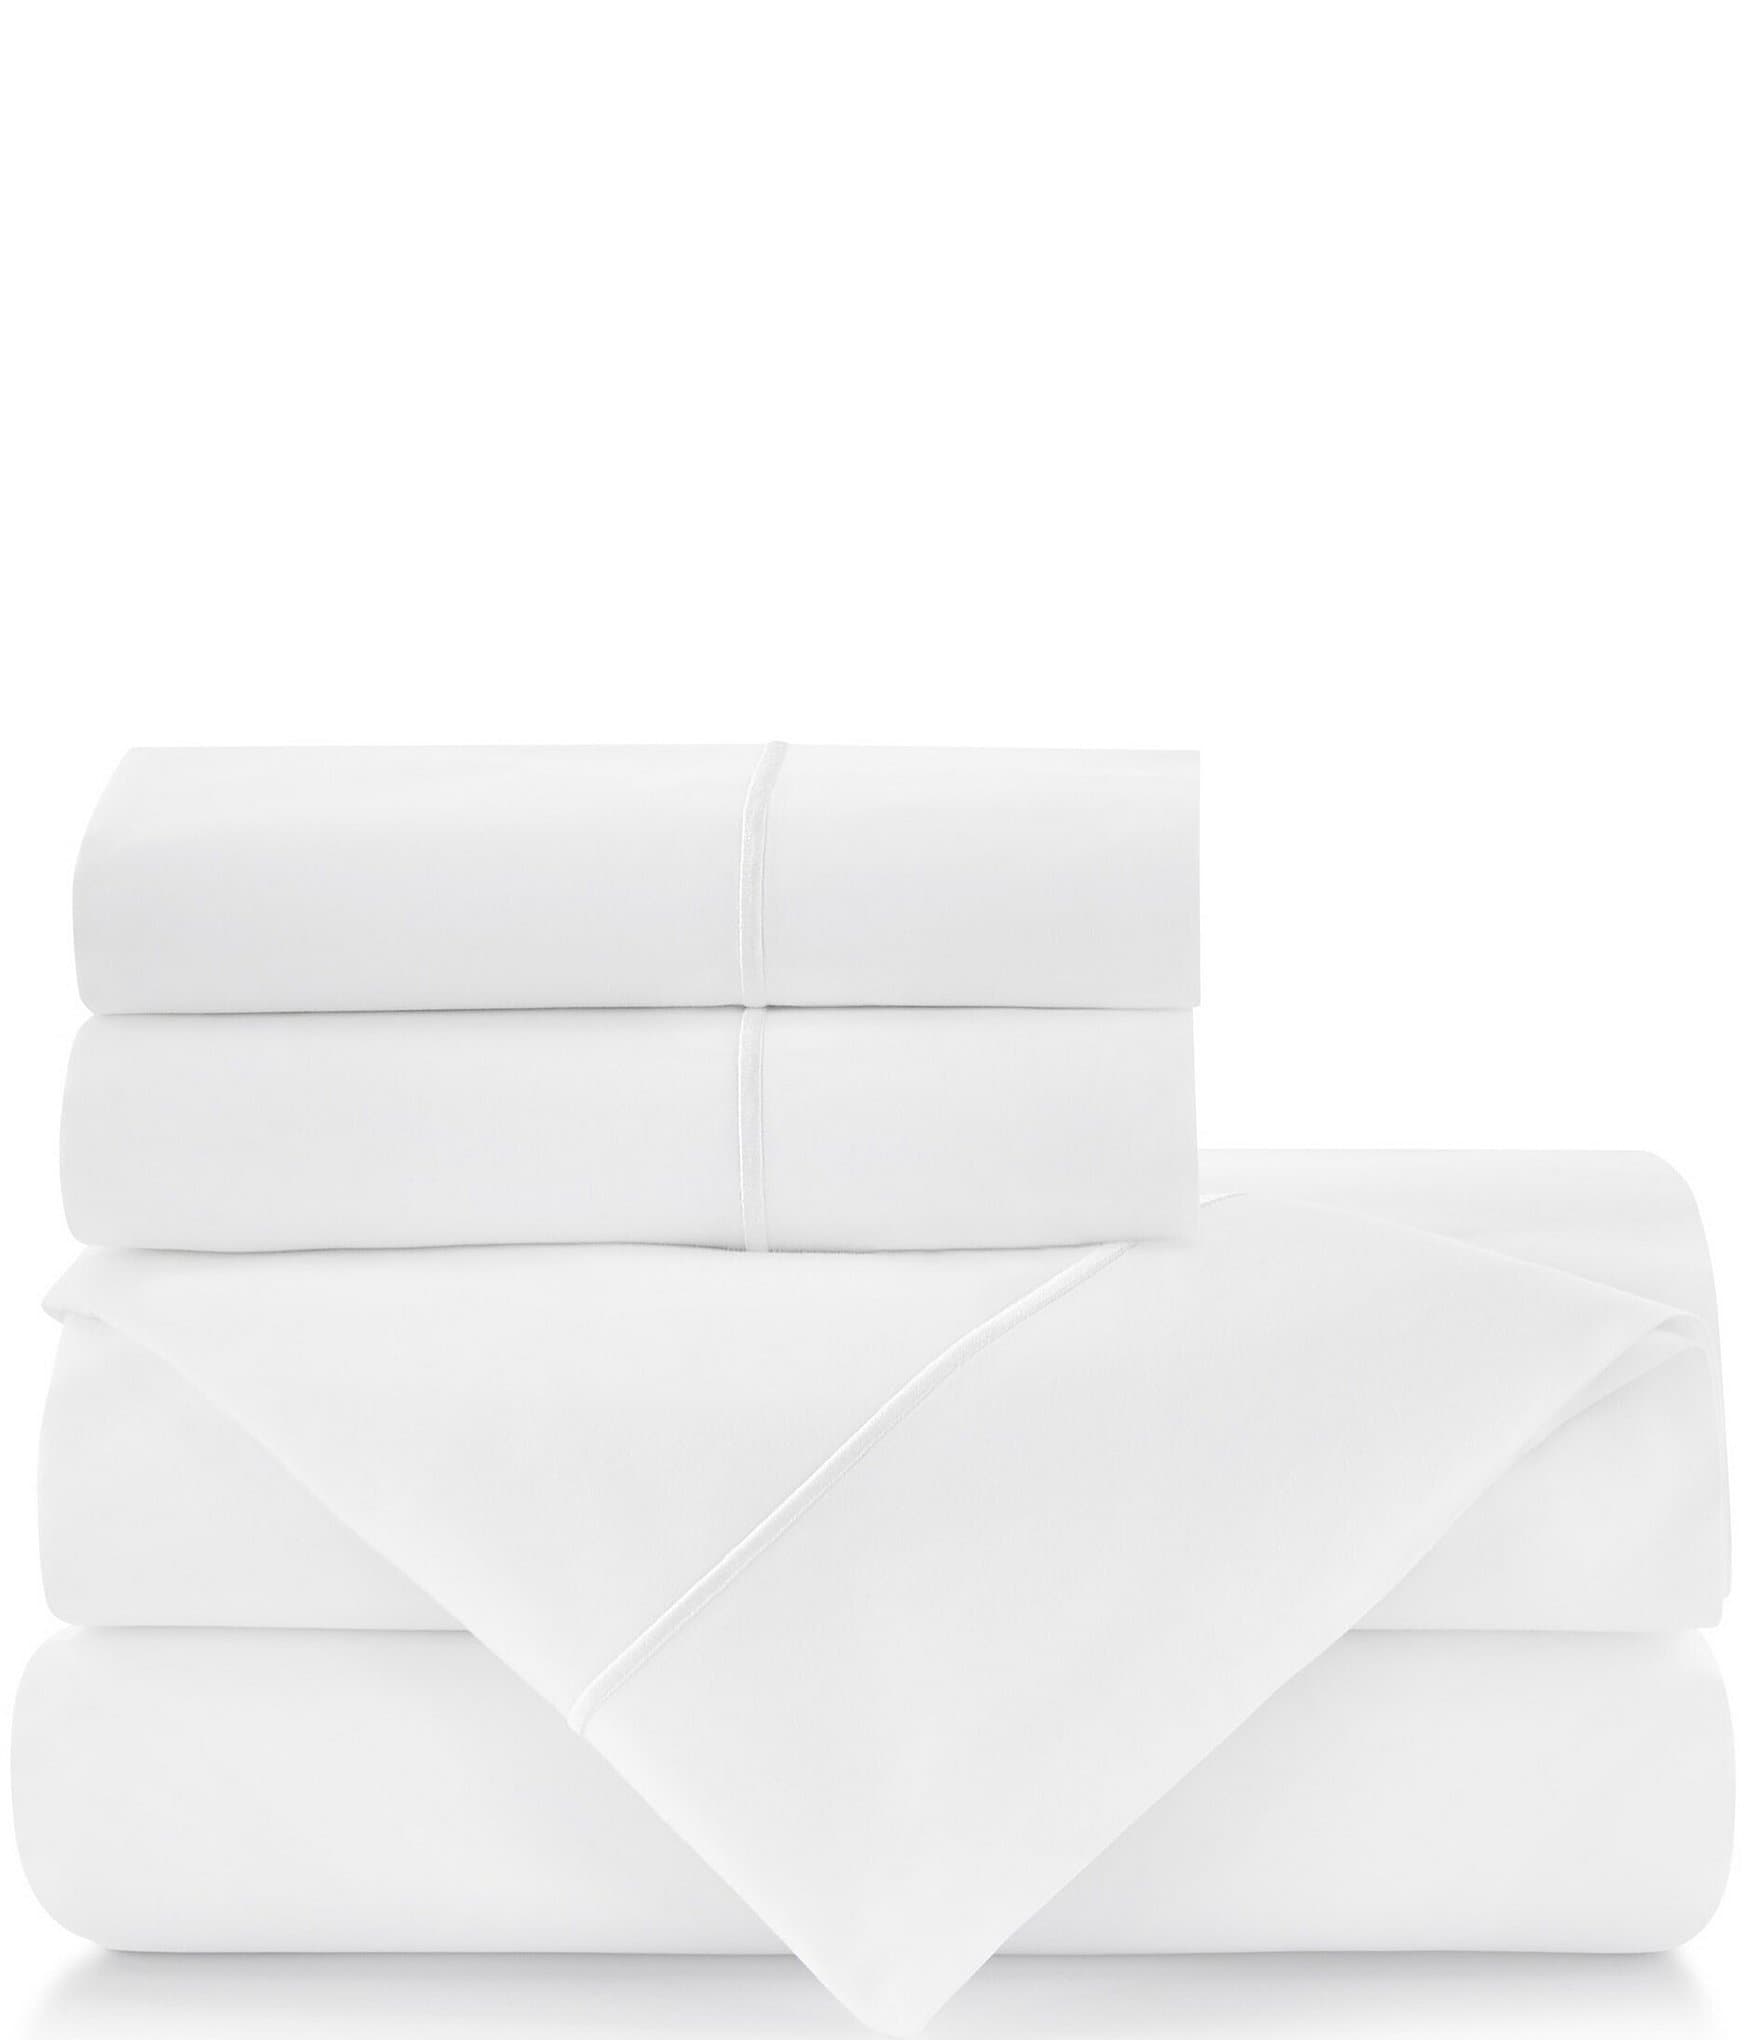 Luxury Hotel 800-Thread-Count Sheet Set Infinity Cotton® with